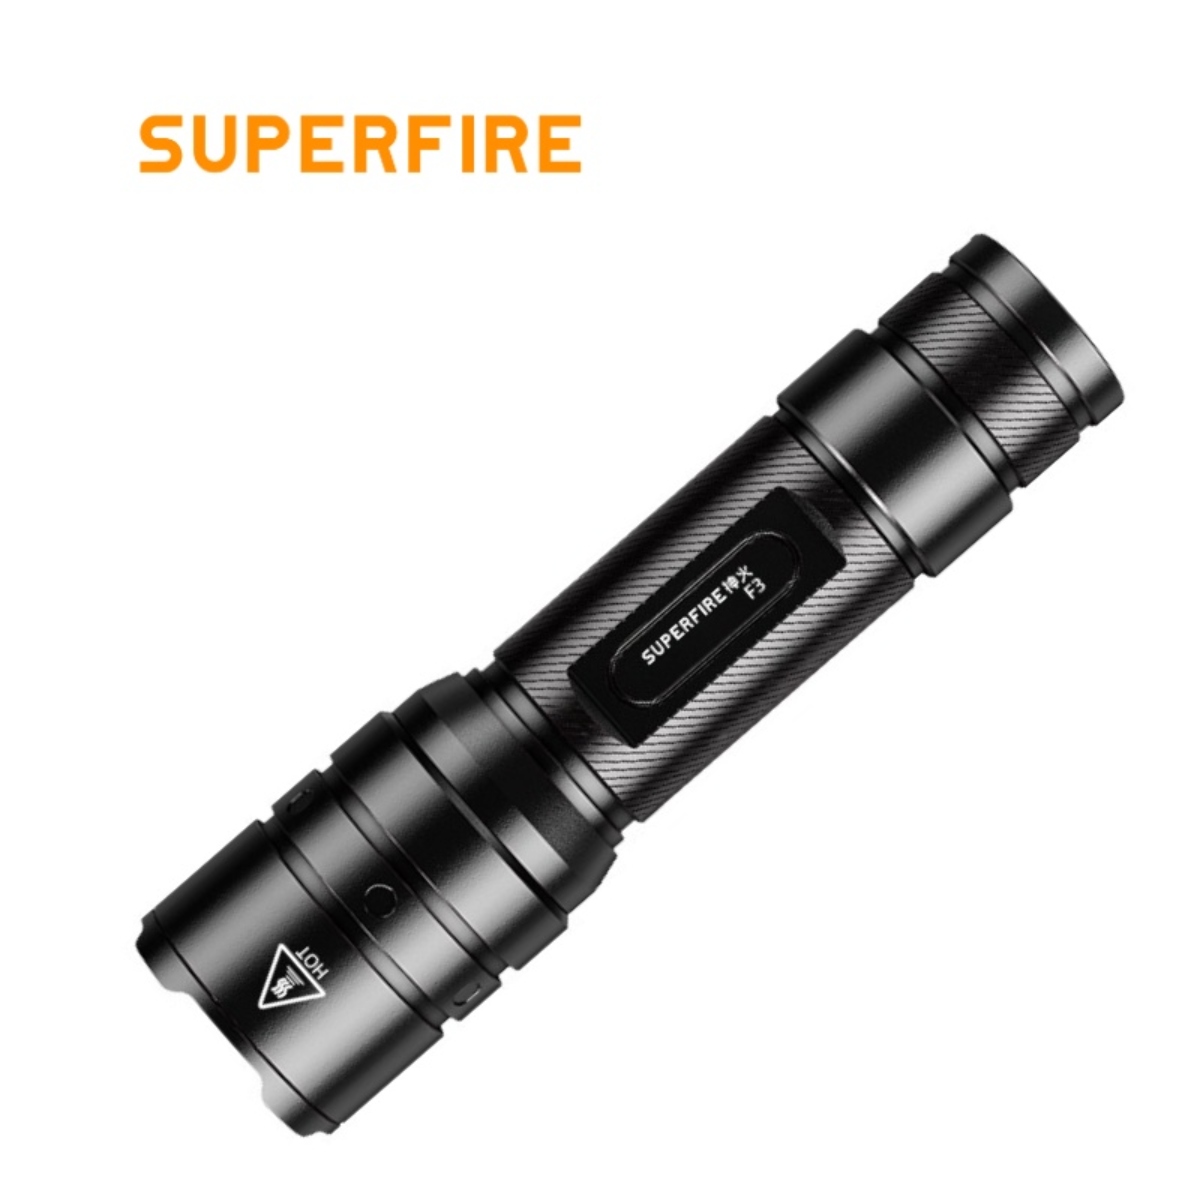 SUPERFIRE F3 Rechargeable Zoom Flashlight